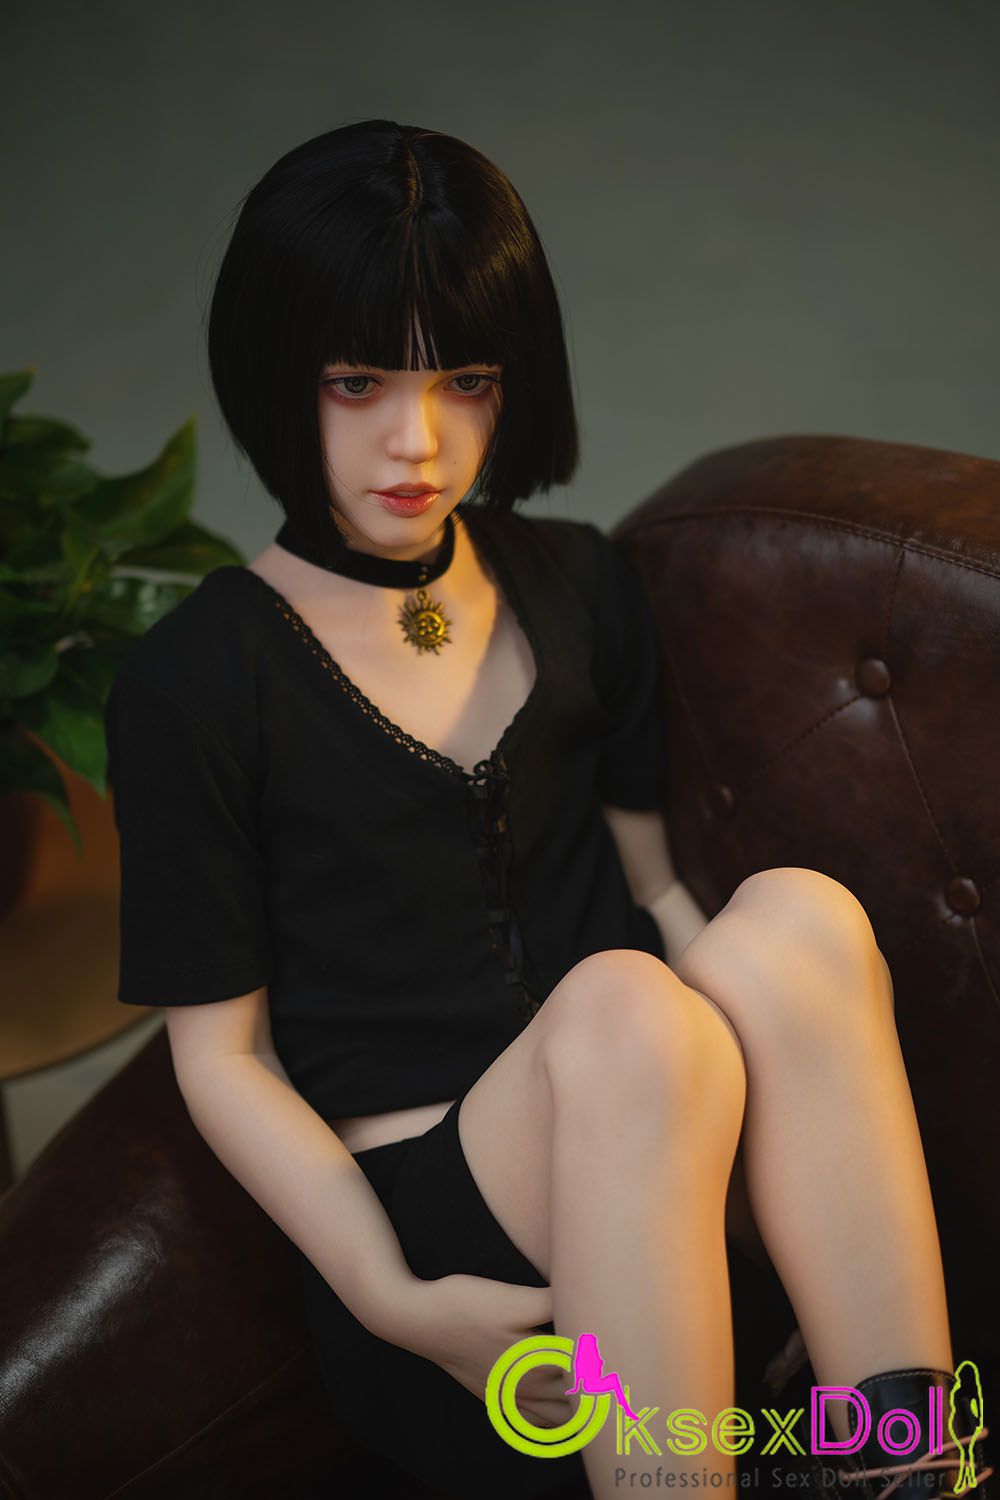 Flat Chested Silicone Real Doll Photos